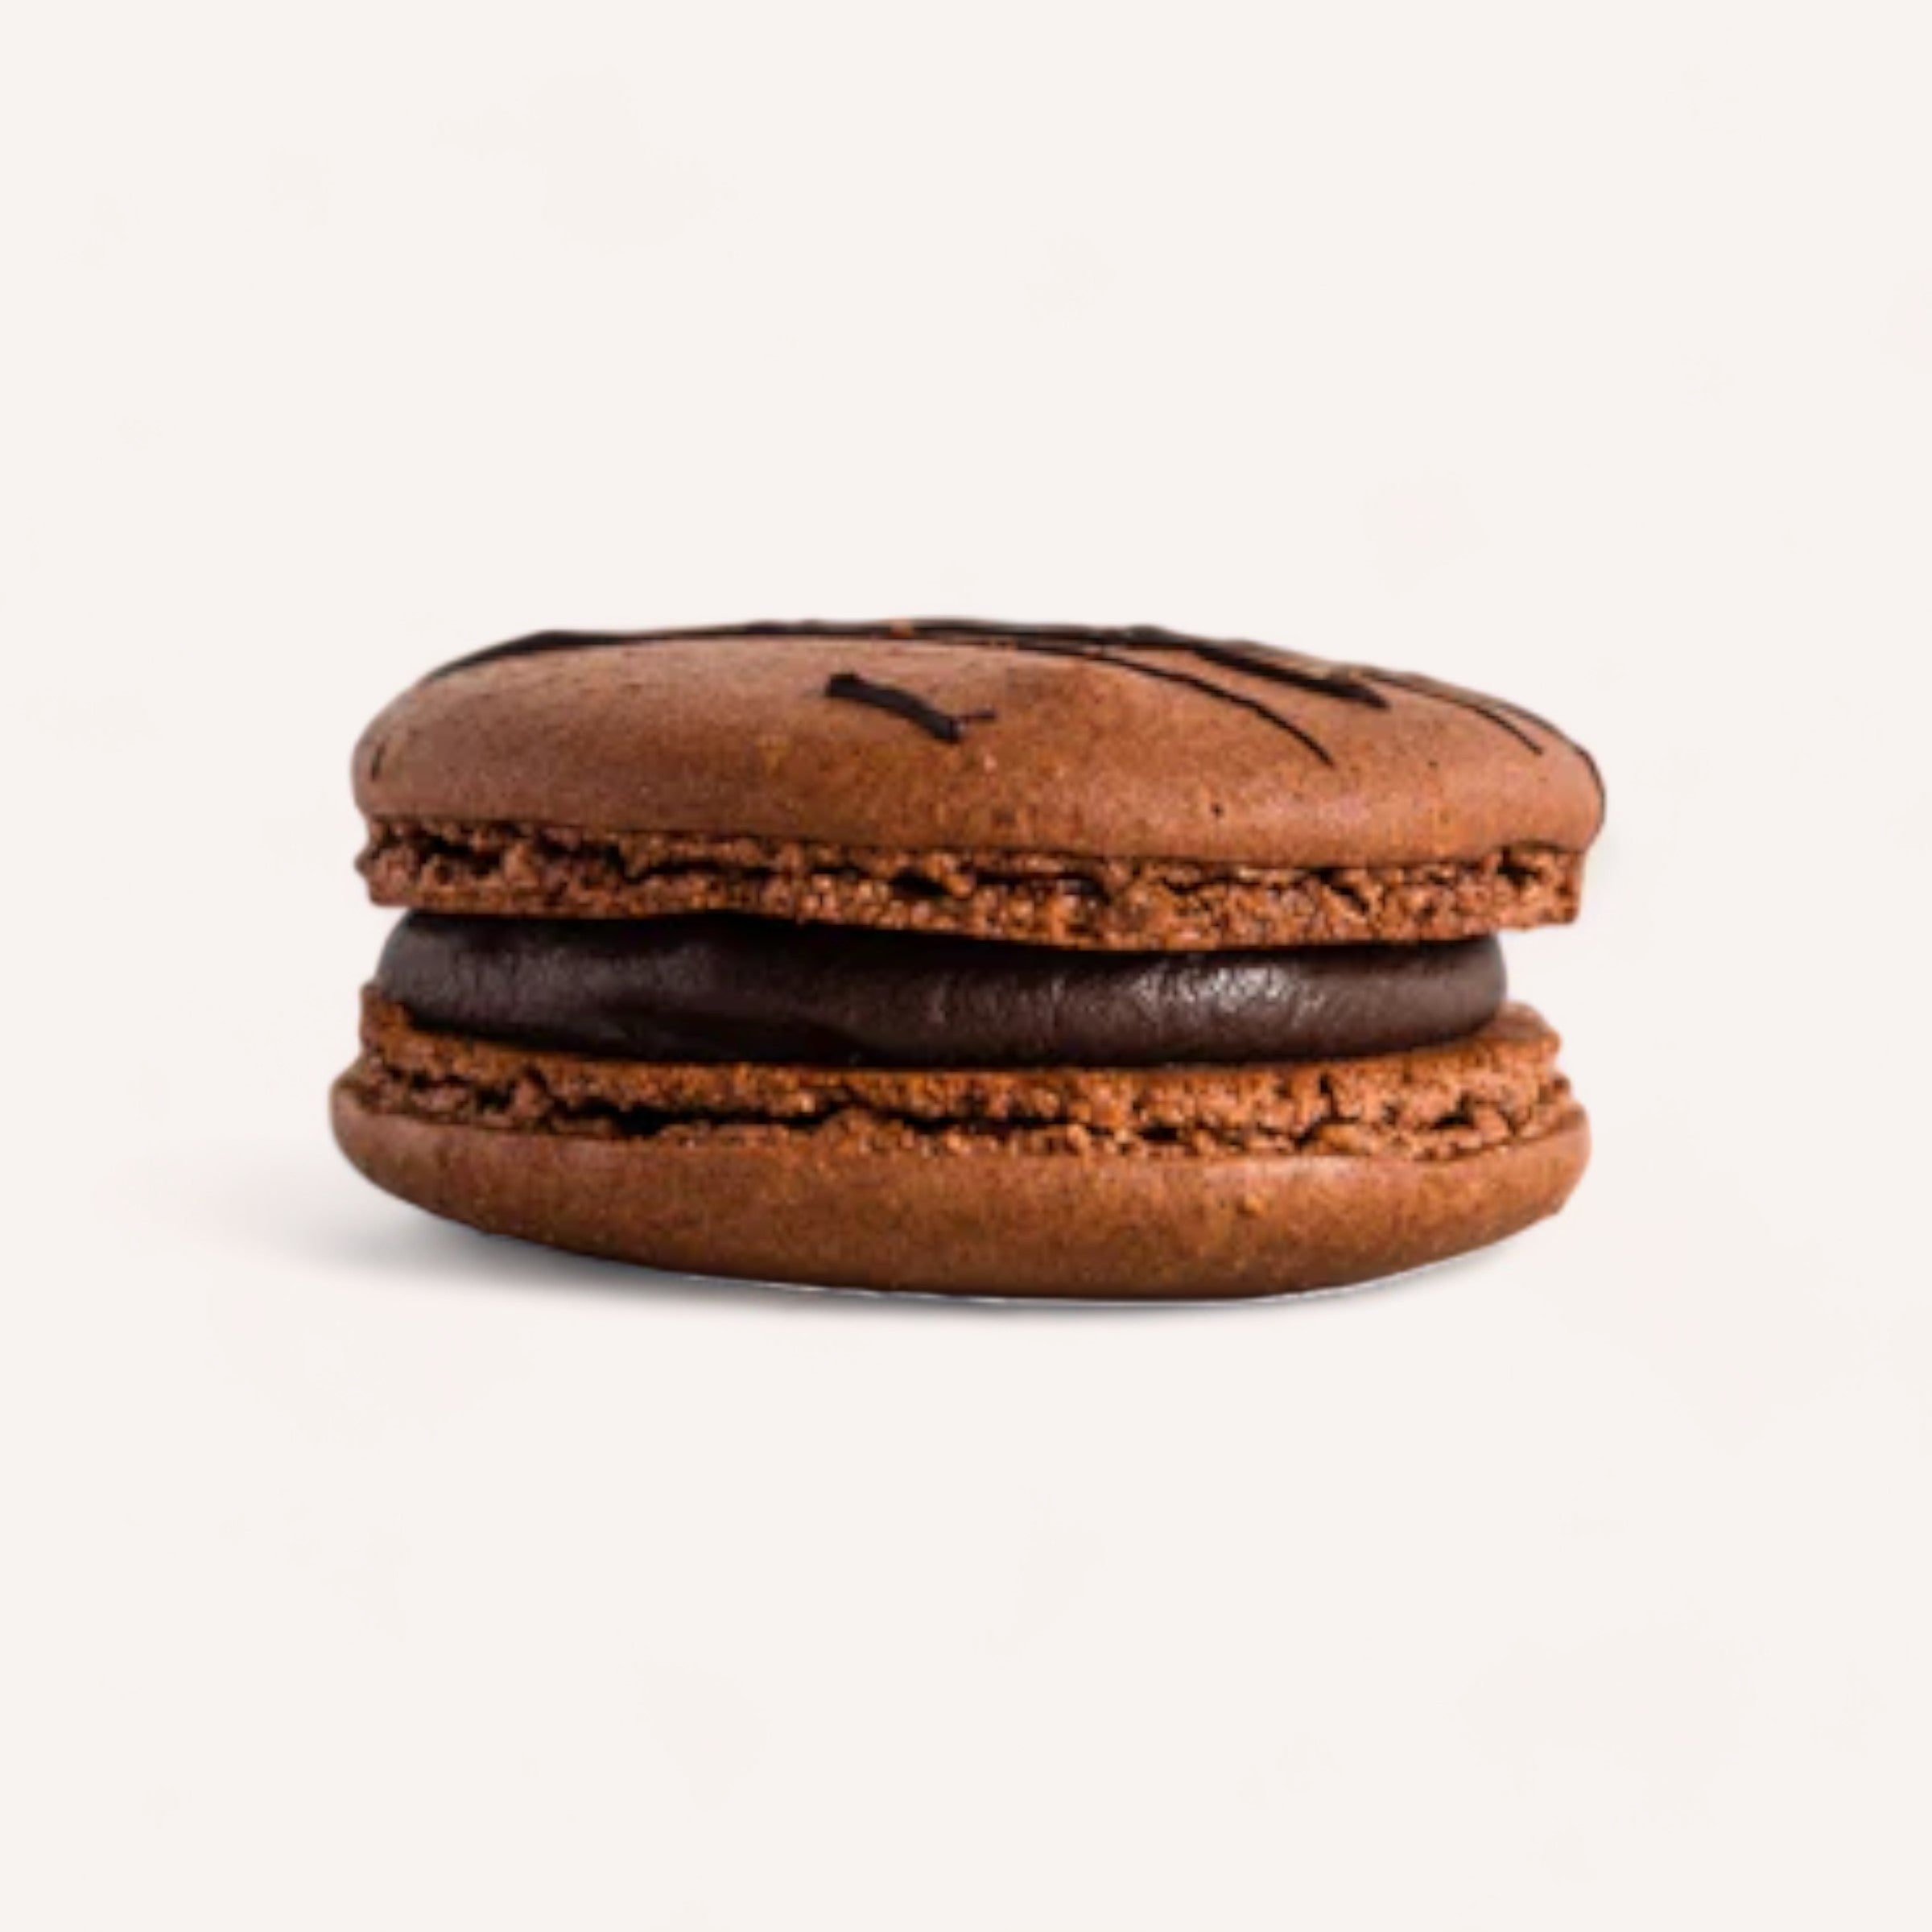 A delicious chocolate macaron with a rich, creamy filling, perfectly sandwiched between two smooth, round handmade J'aime les Macarons shells.